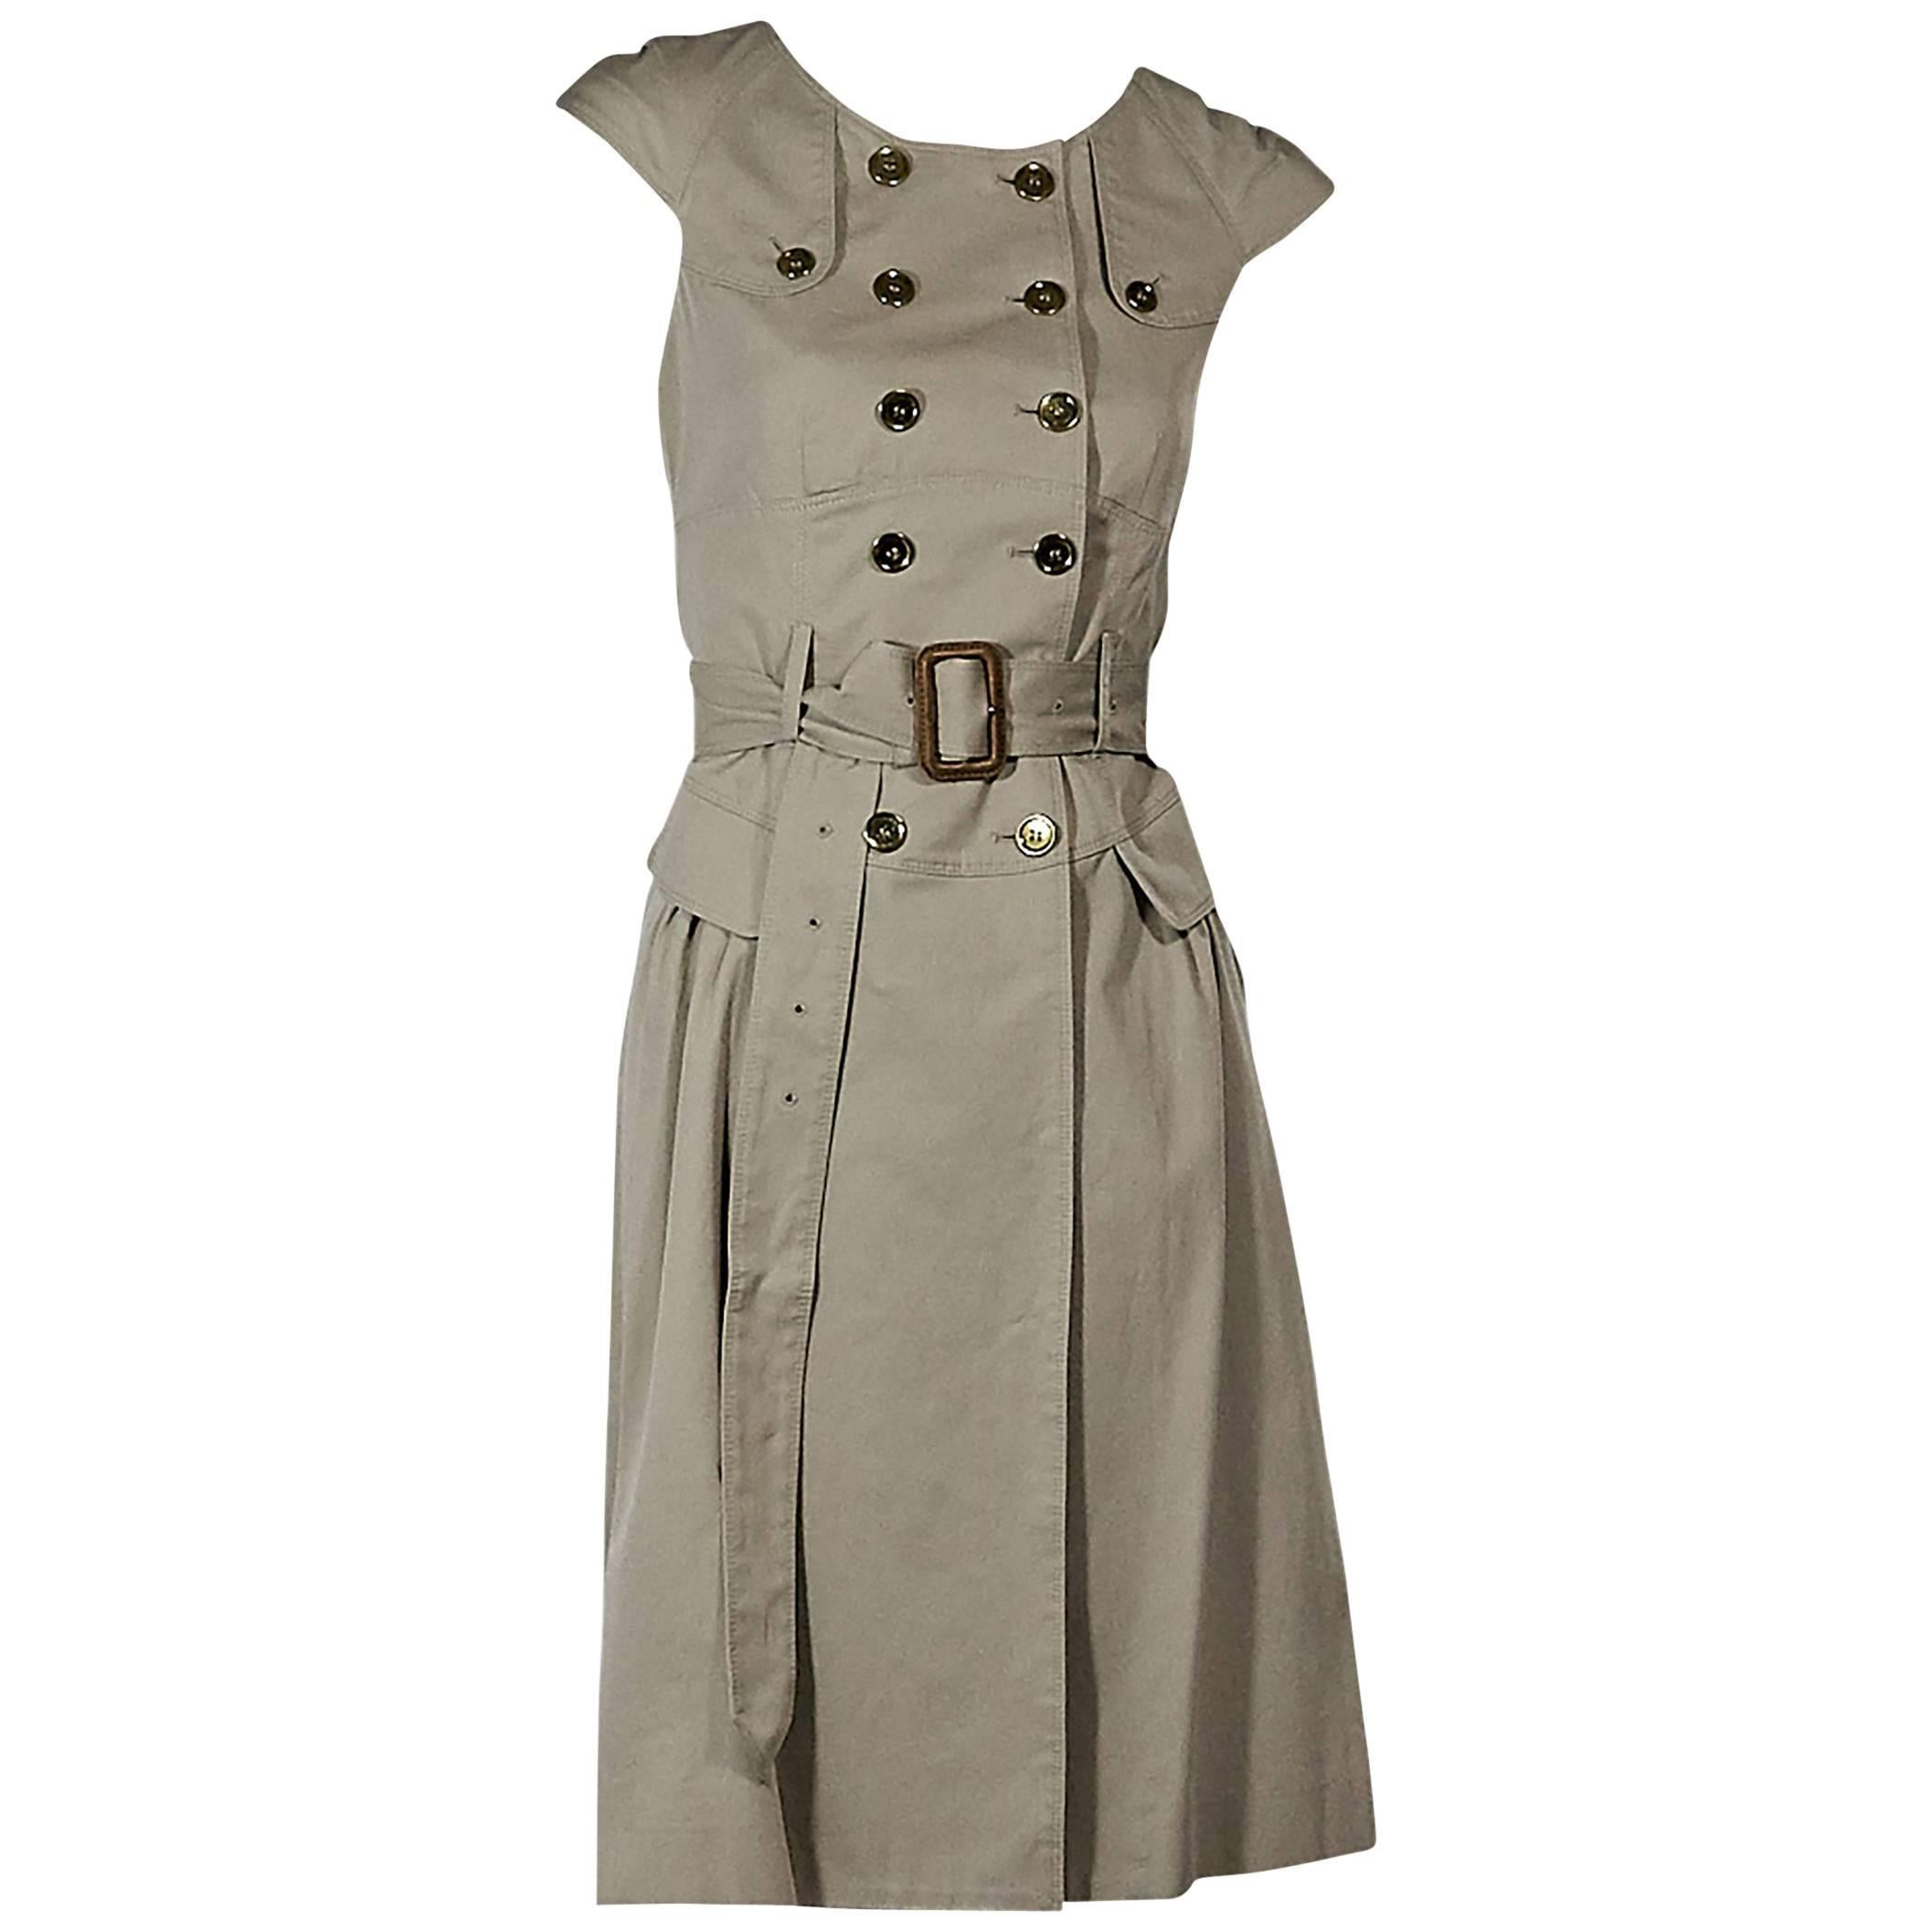 Tan Burberry London Trench-Style Dress